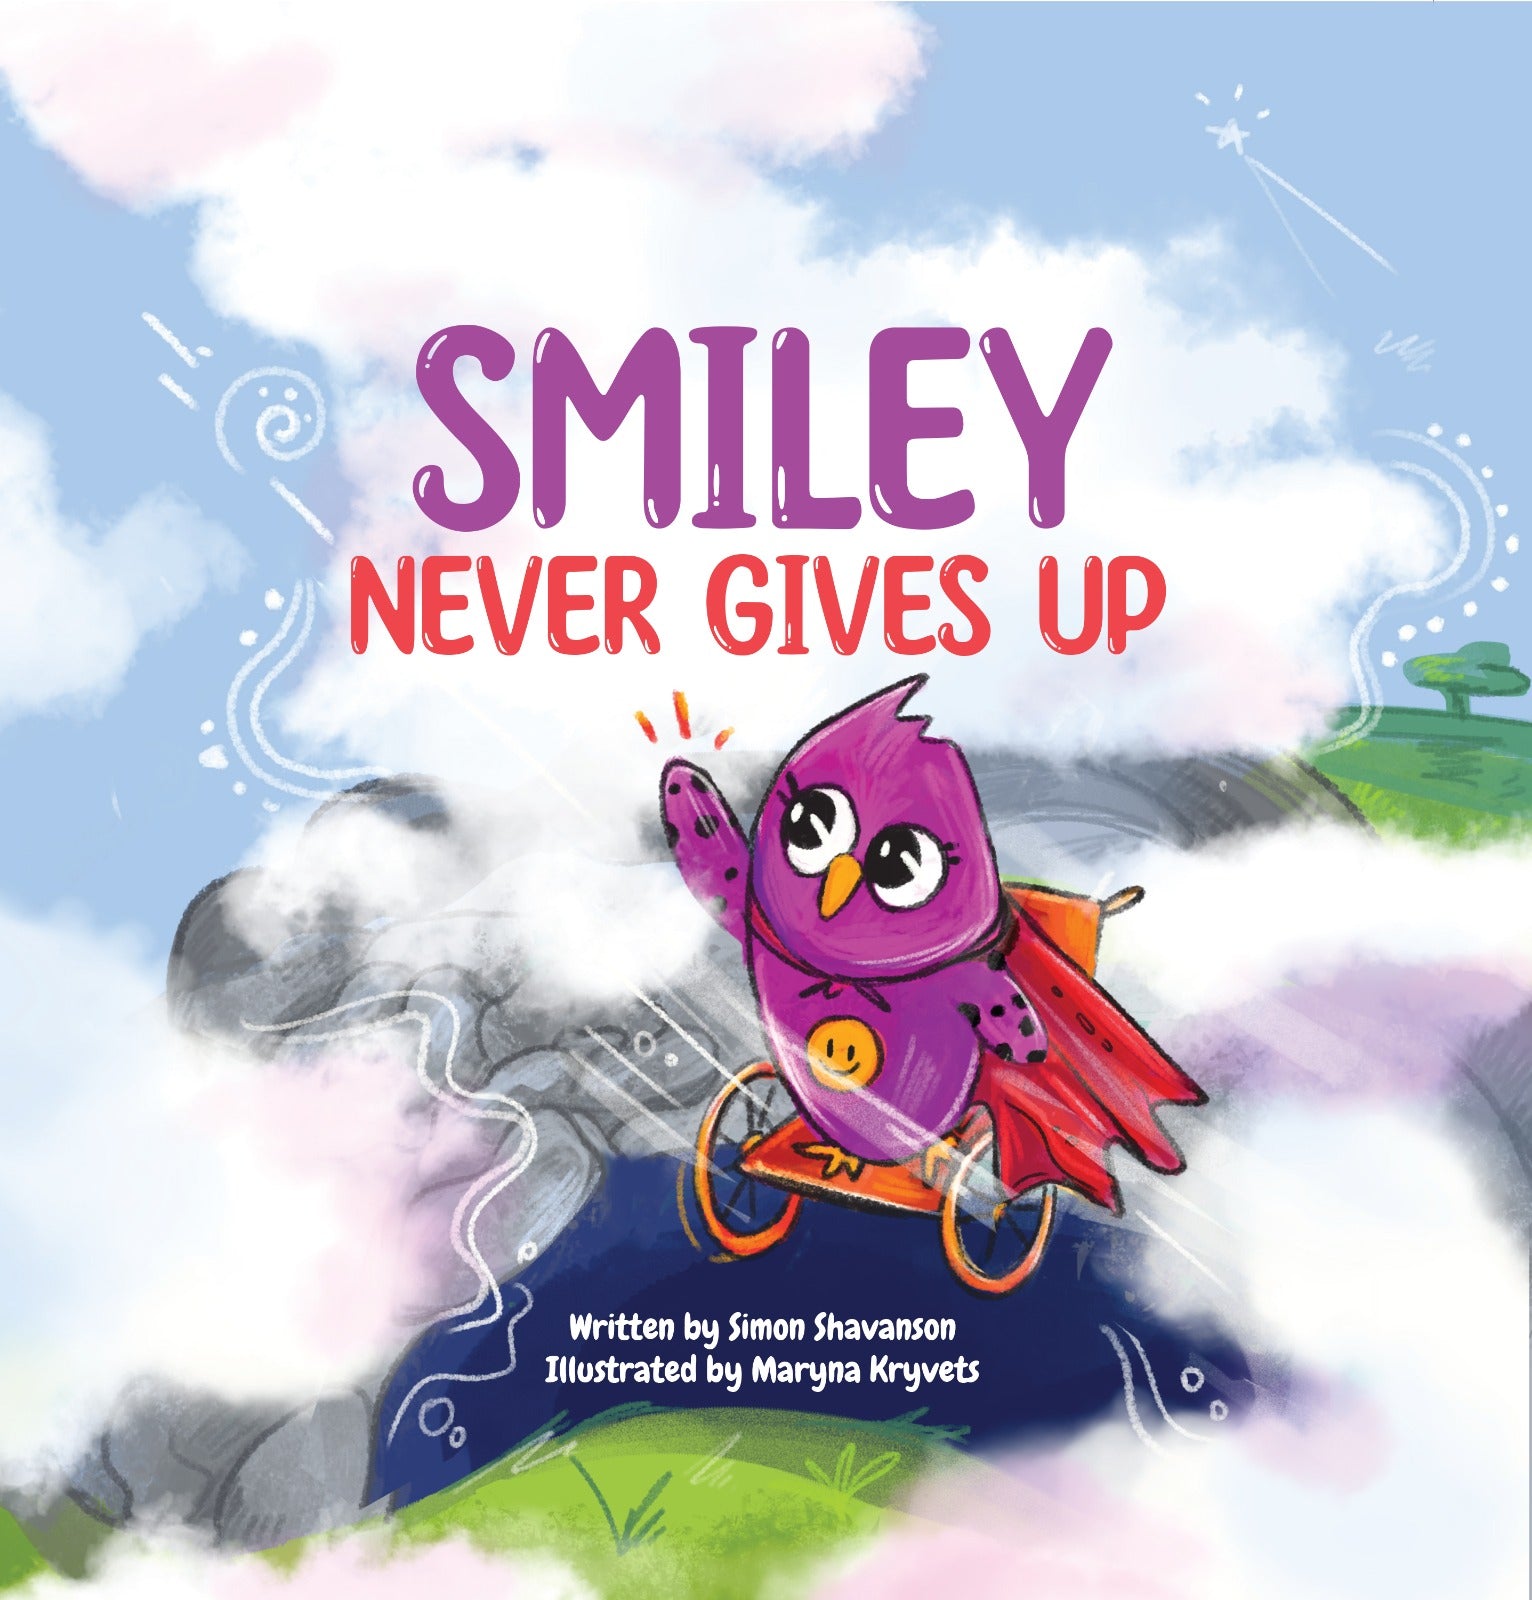 SMILEY NEVER GIVES UP